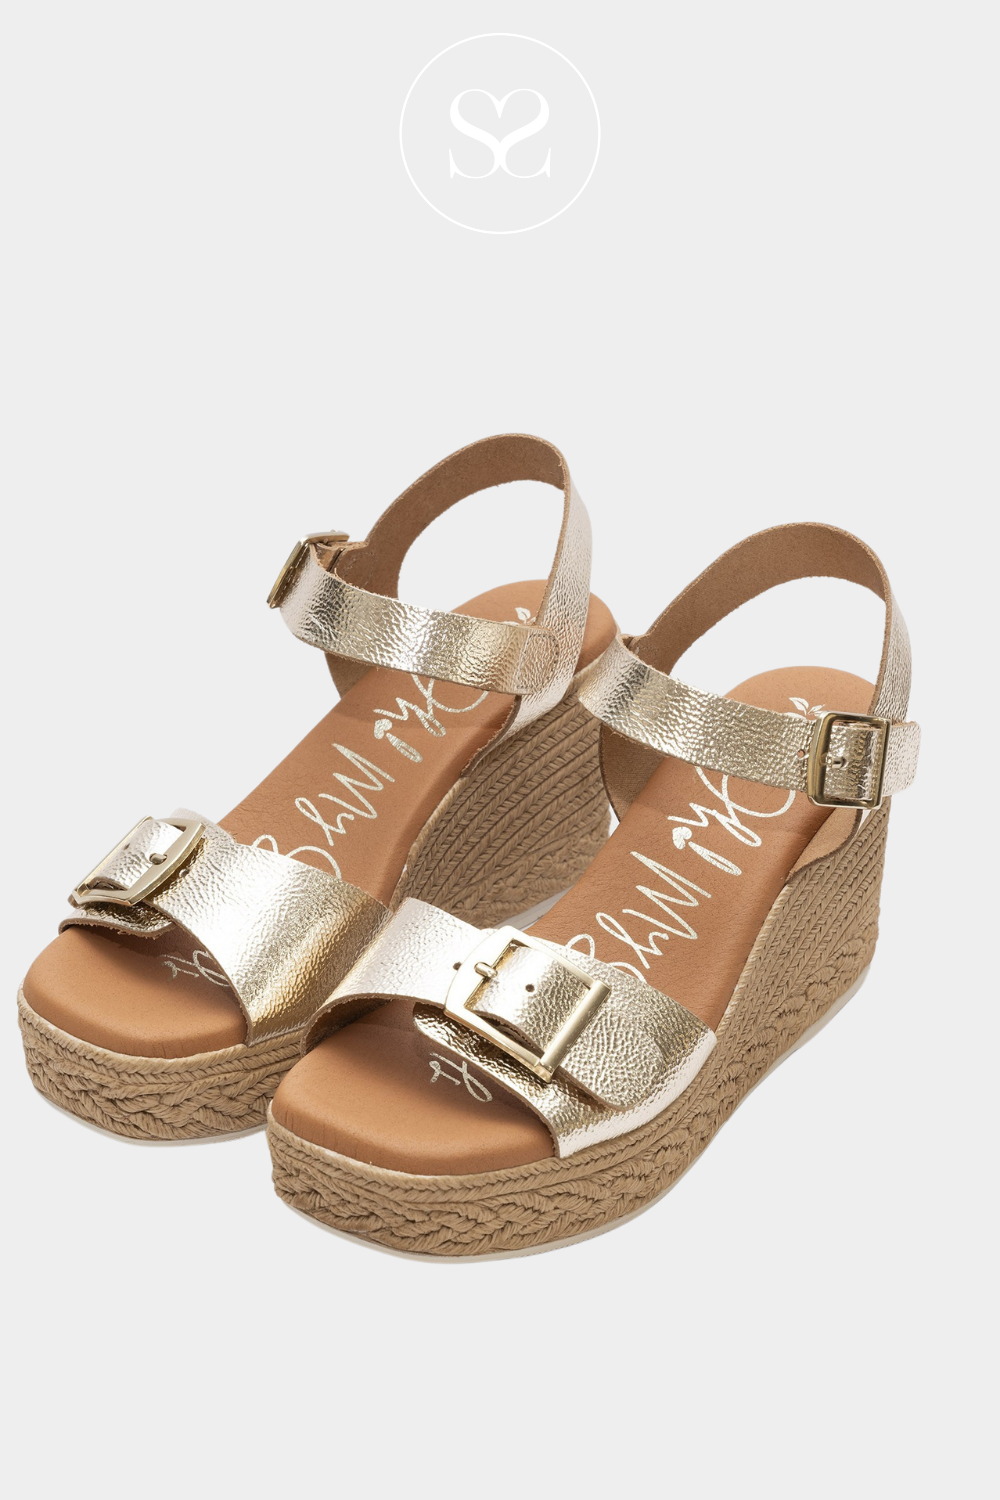 OH MY SANDALS 5459 GOLD LEATHER WEDGE PLATFORM SOLE SANDALS WITH ADJUSTABLE ANKLE STRAP AND WIDE STRAP ACROSS THE FOOT. ESPADRILLE SOLE